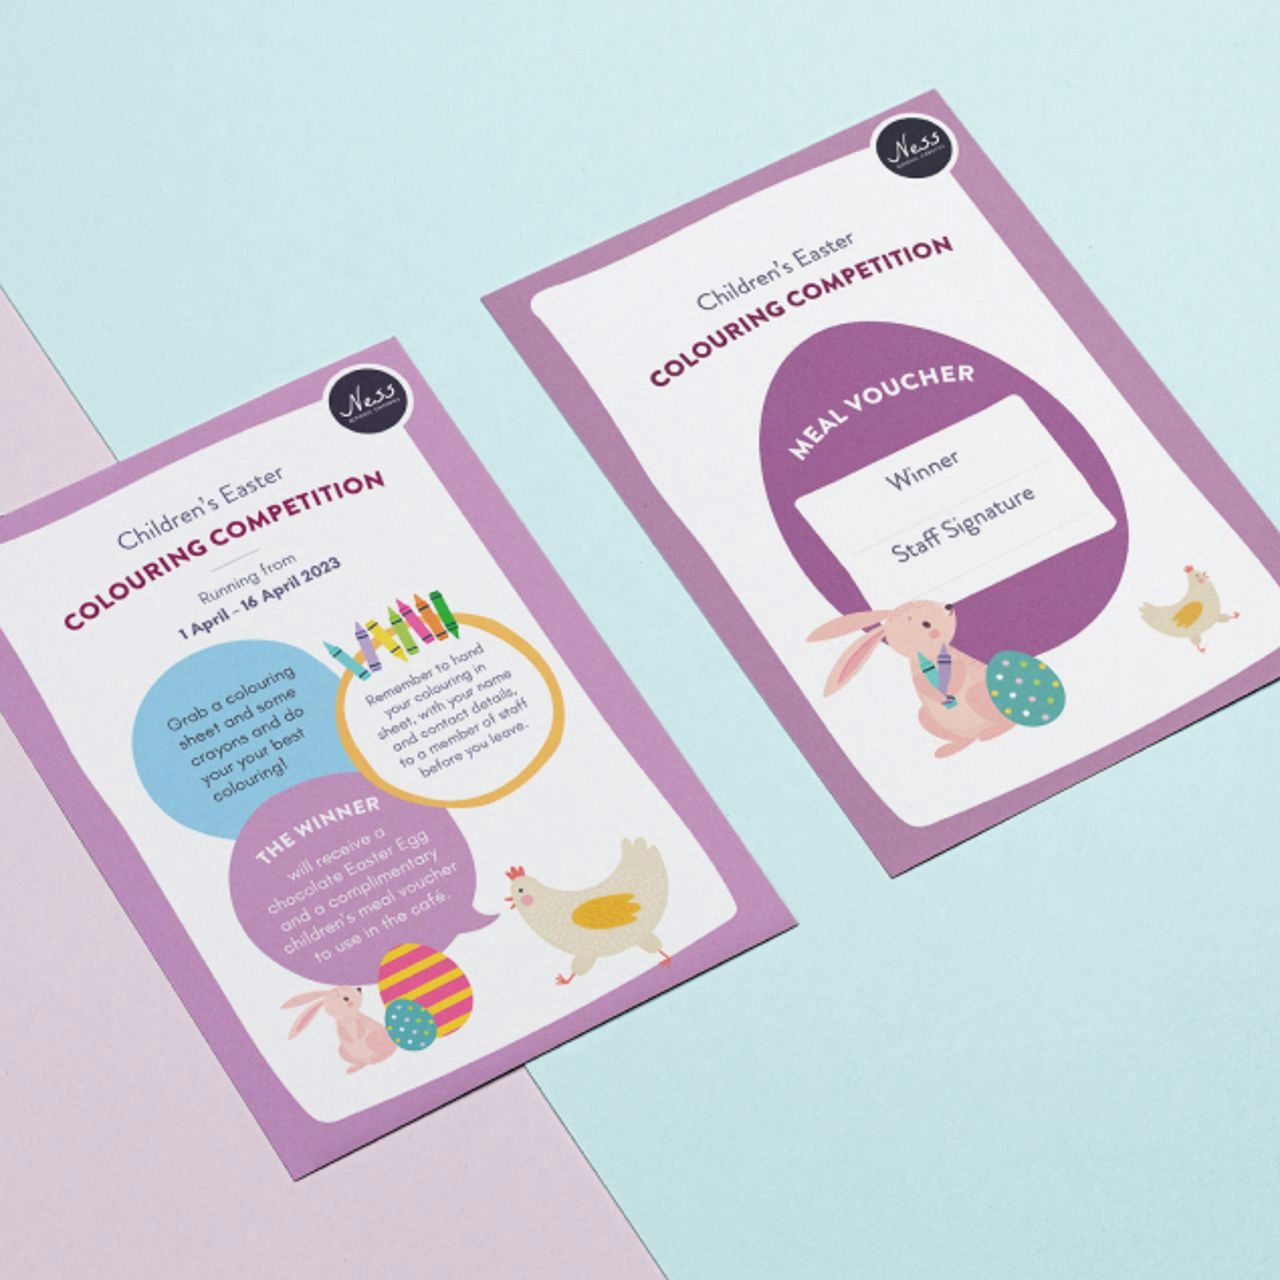 Two flyers on a dual pink and blue background advertise a Children's Easter Colouring Competition by Ness.